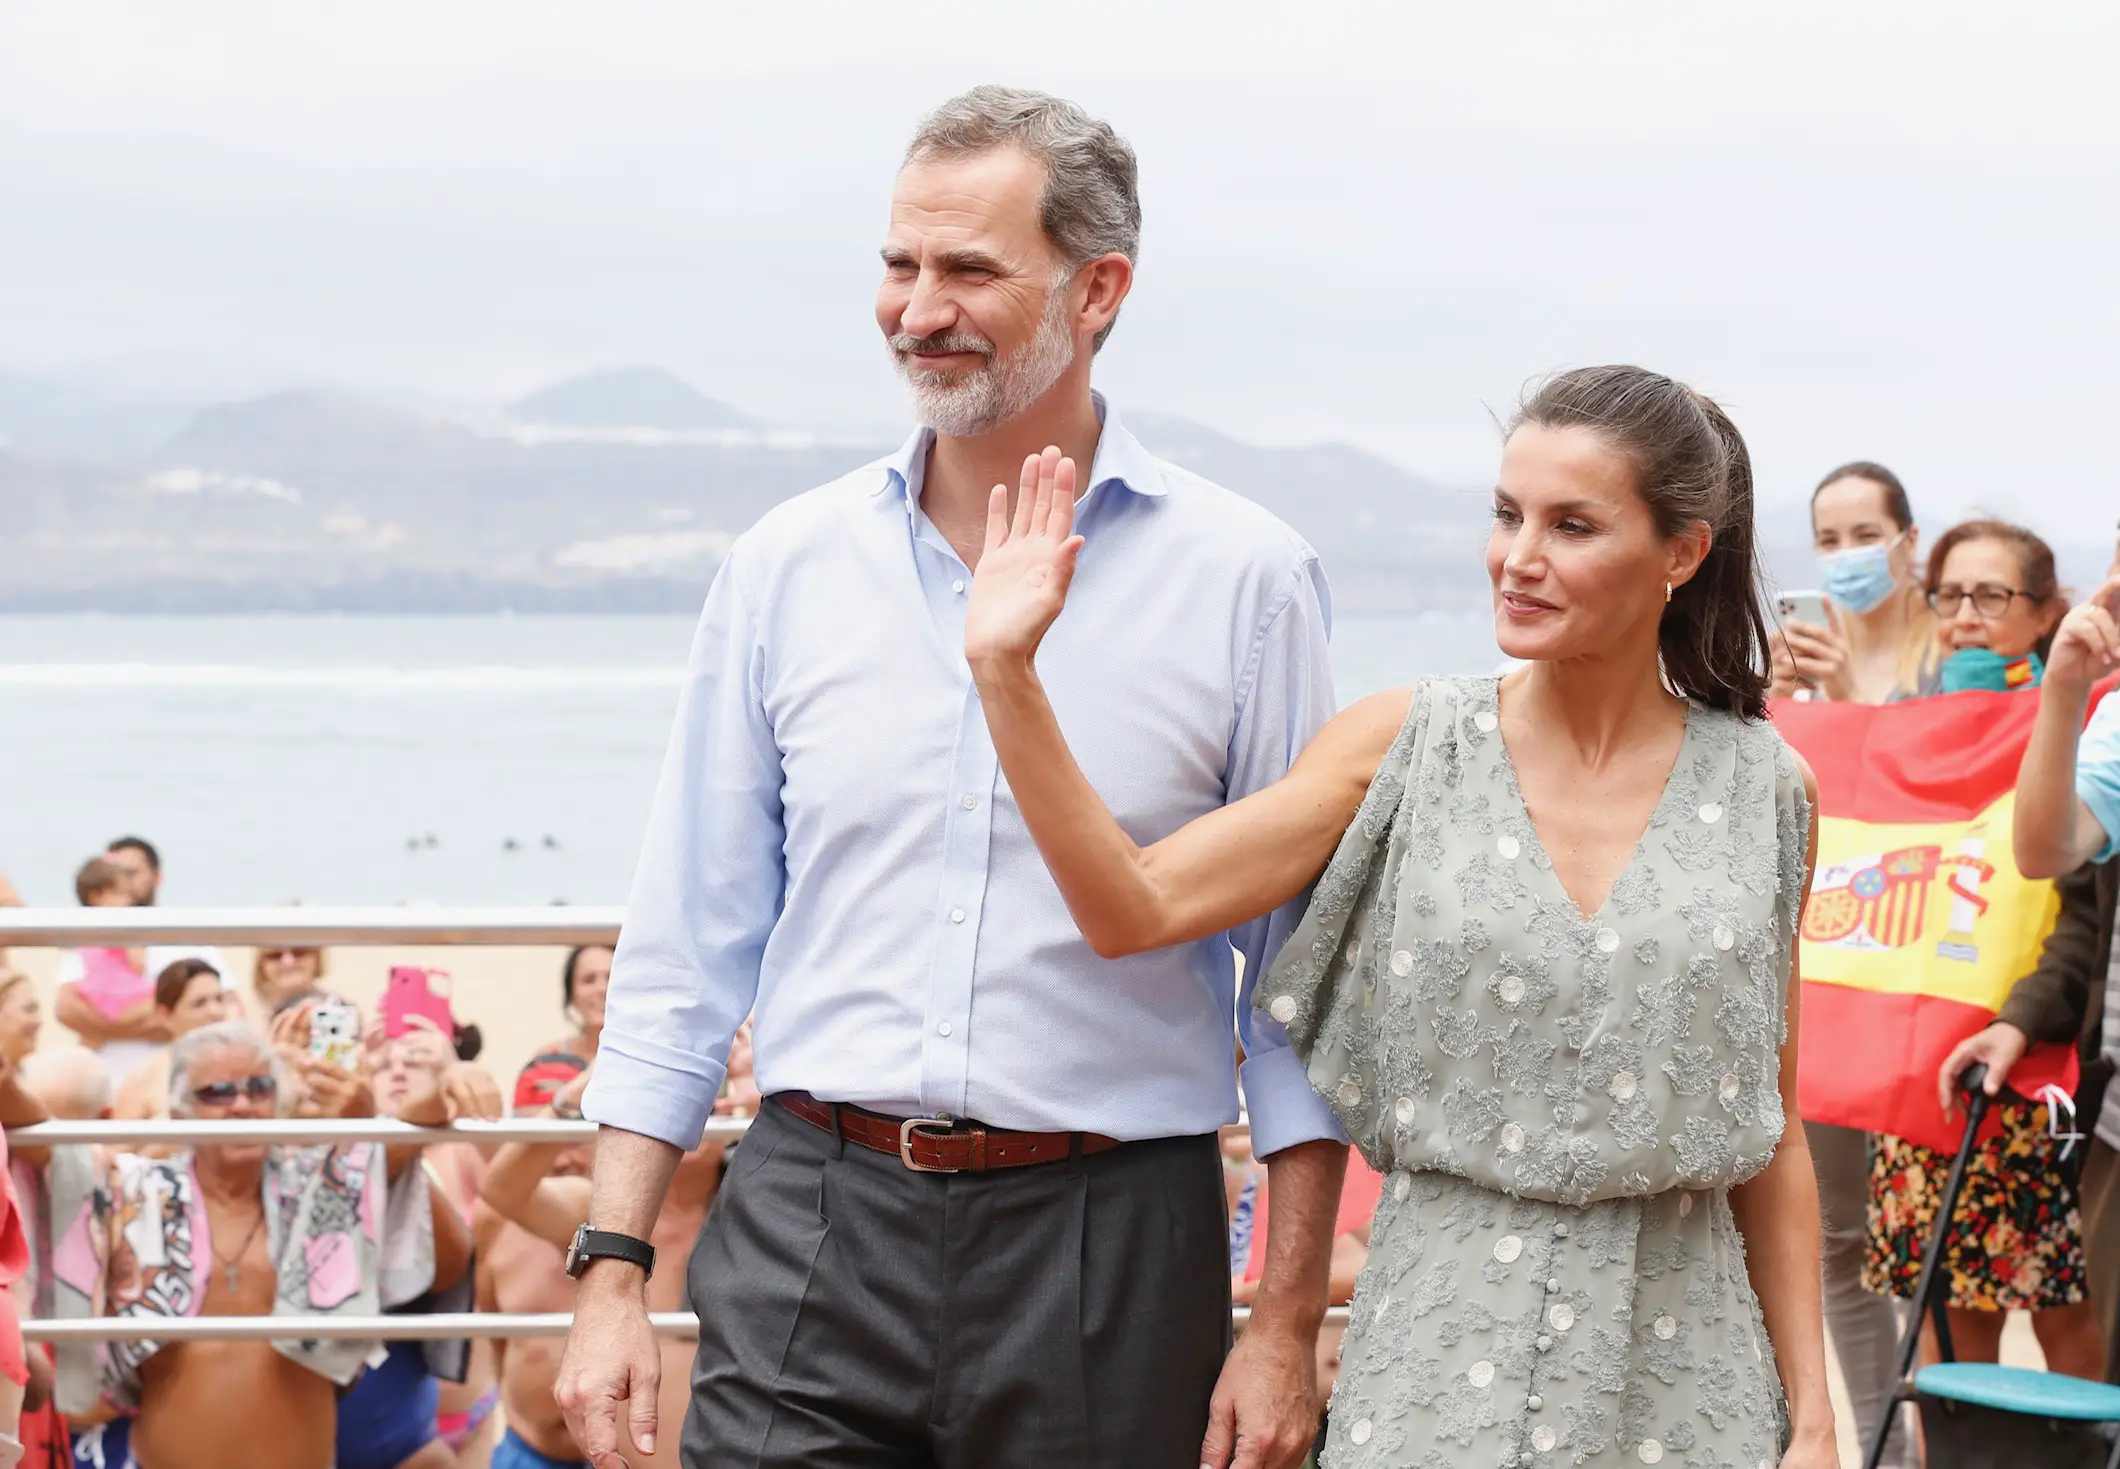 King Felipe and Queen Letizia of Spain visited Canary Islands